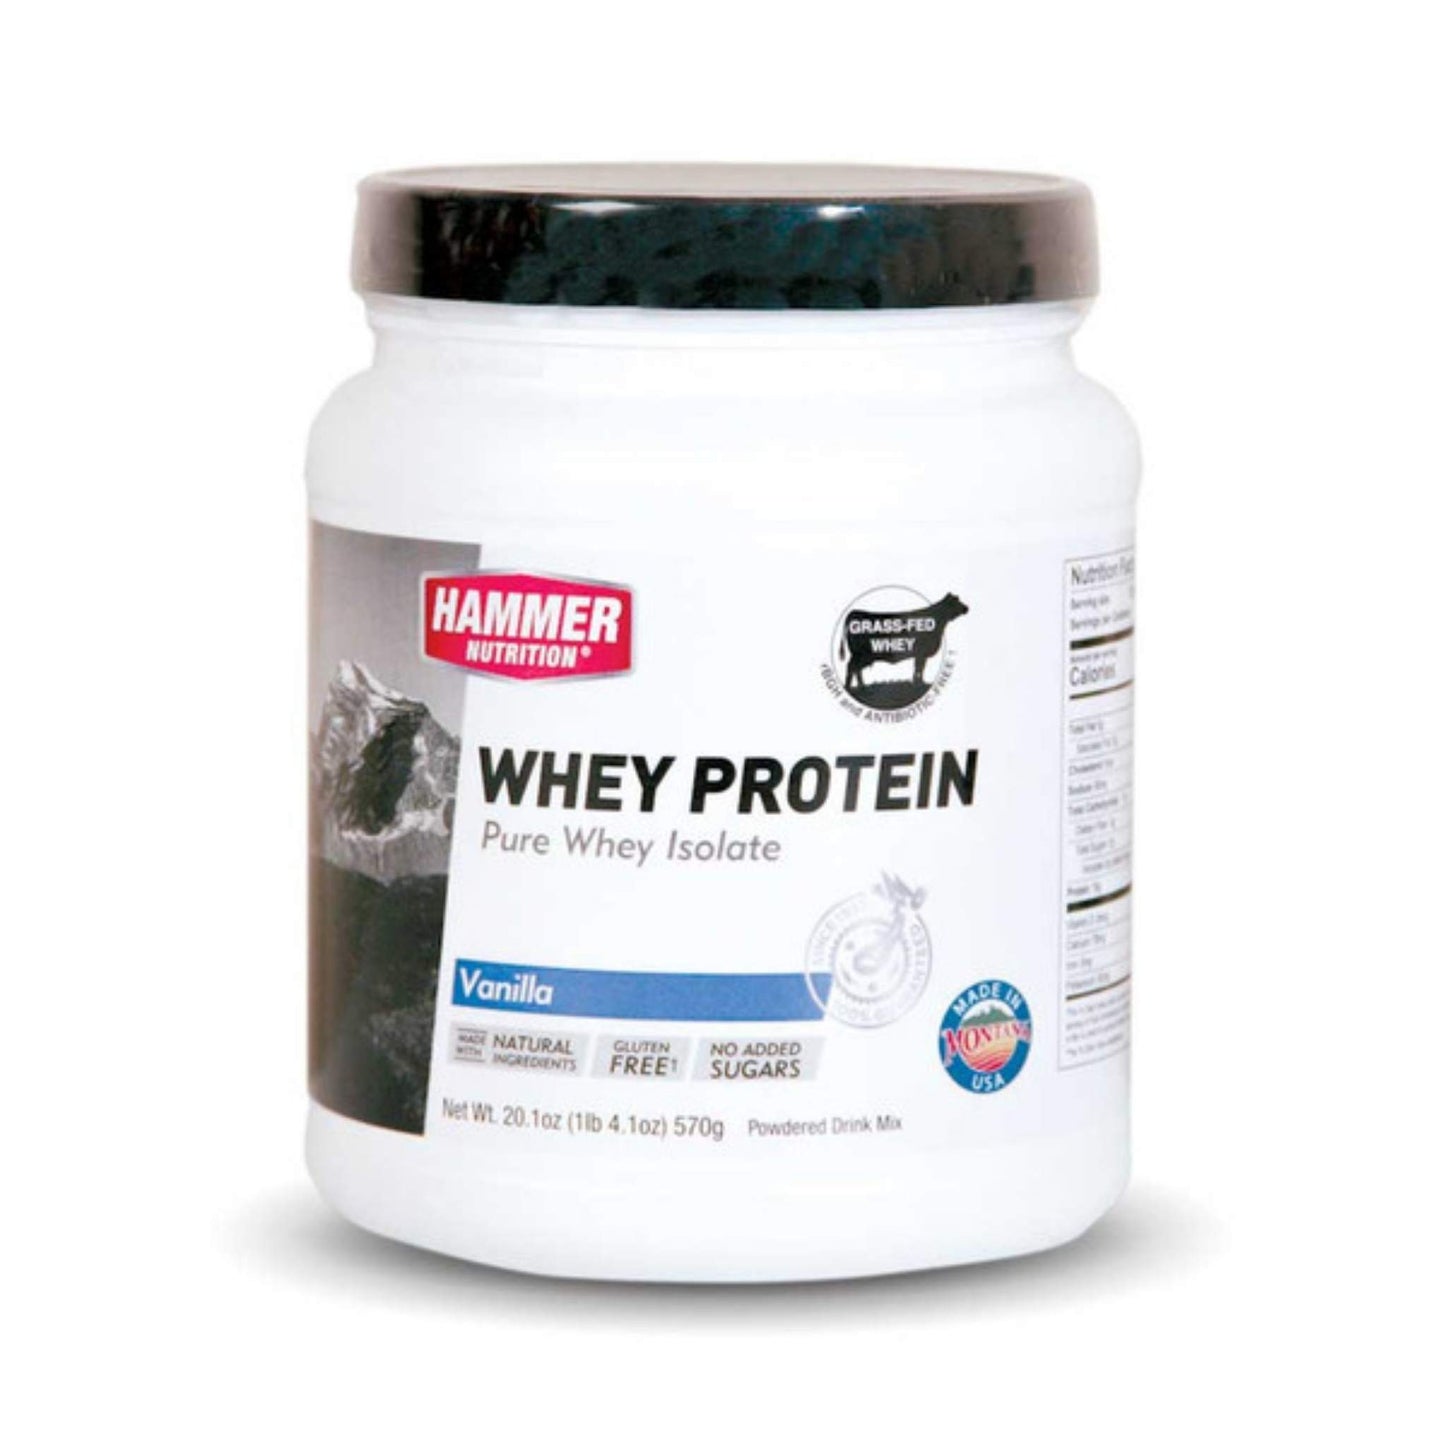 Hammer Nutrition - Whey Protein, Vanilla, 24 Servings, Team Perfect